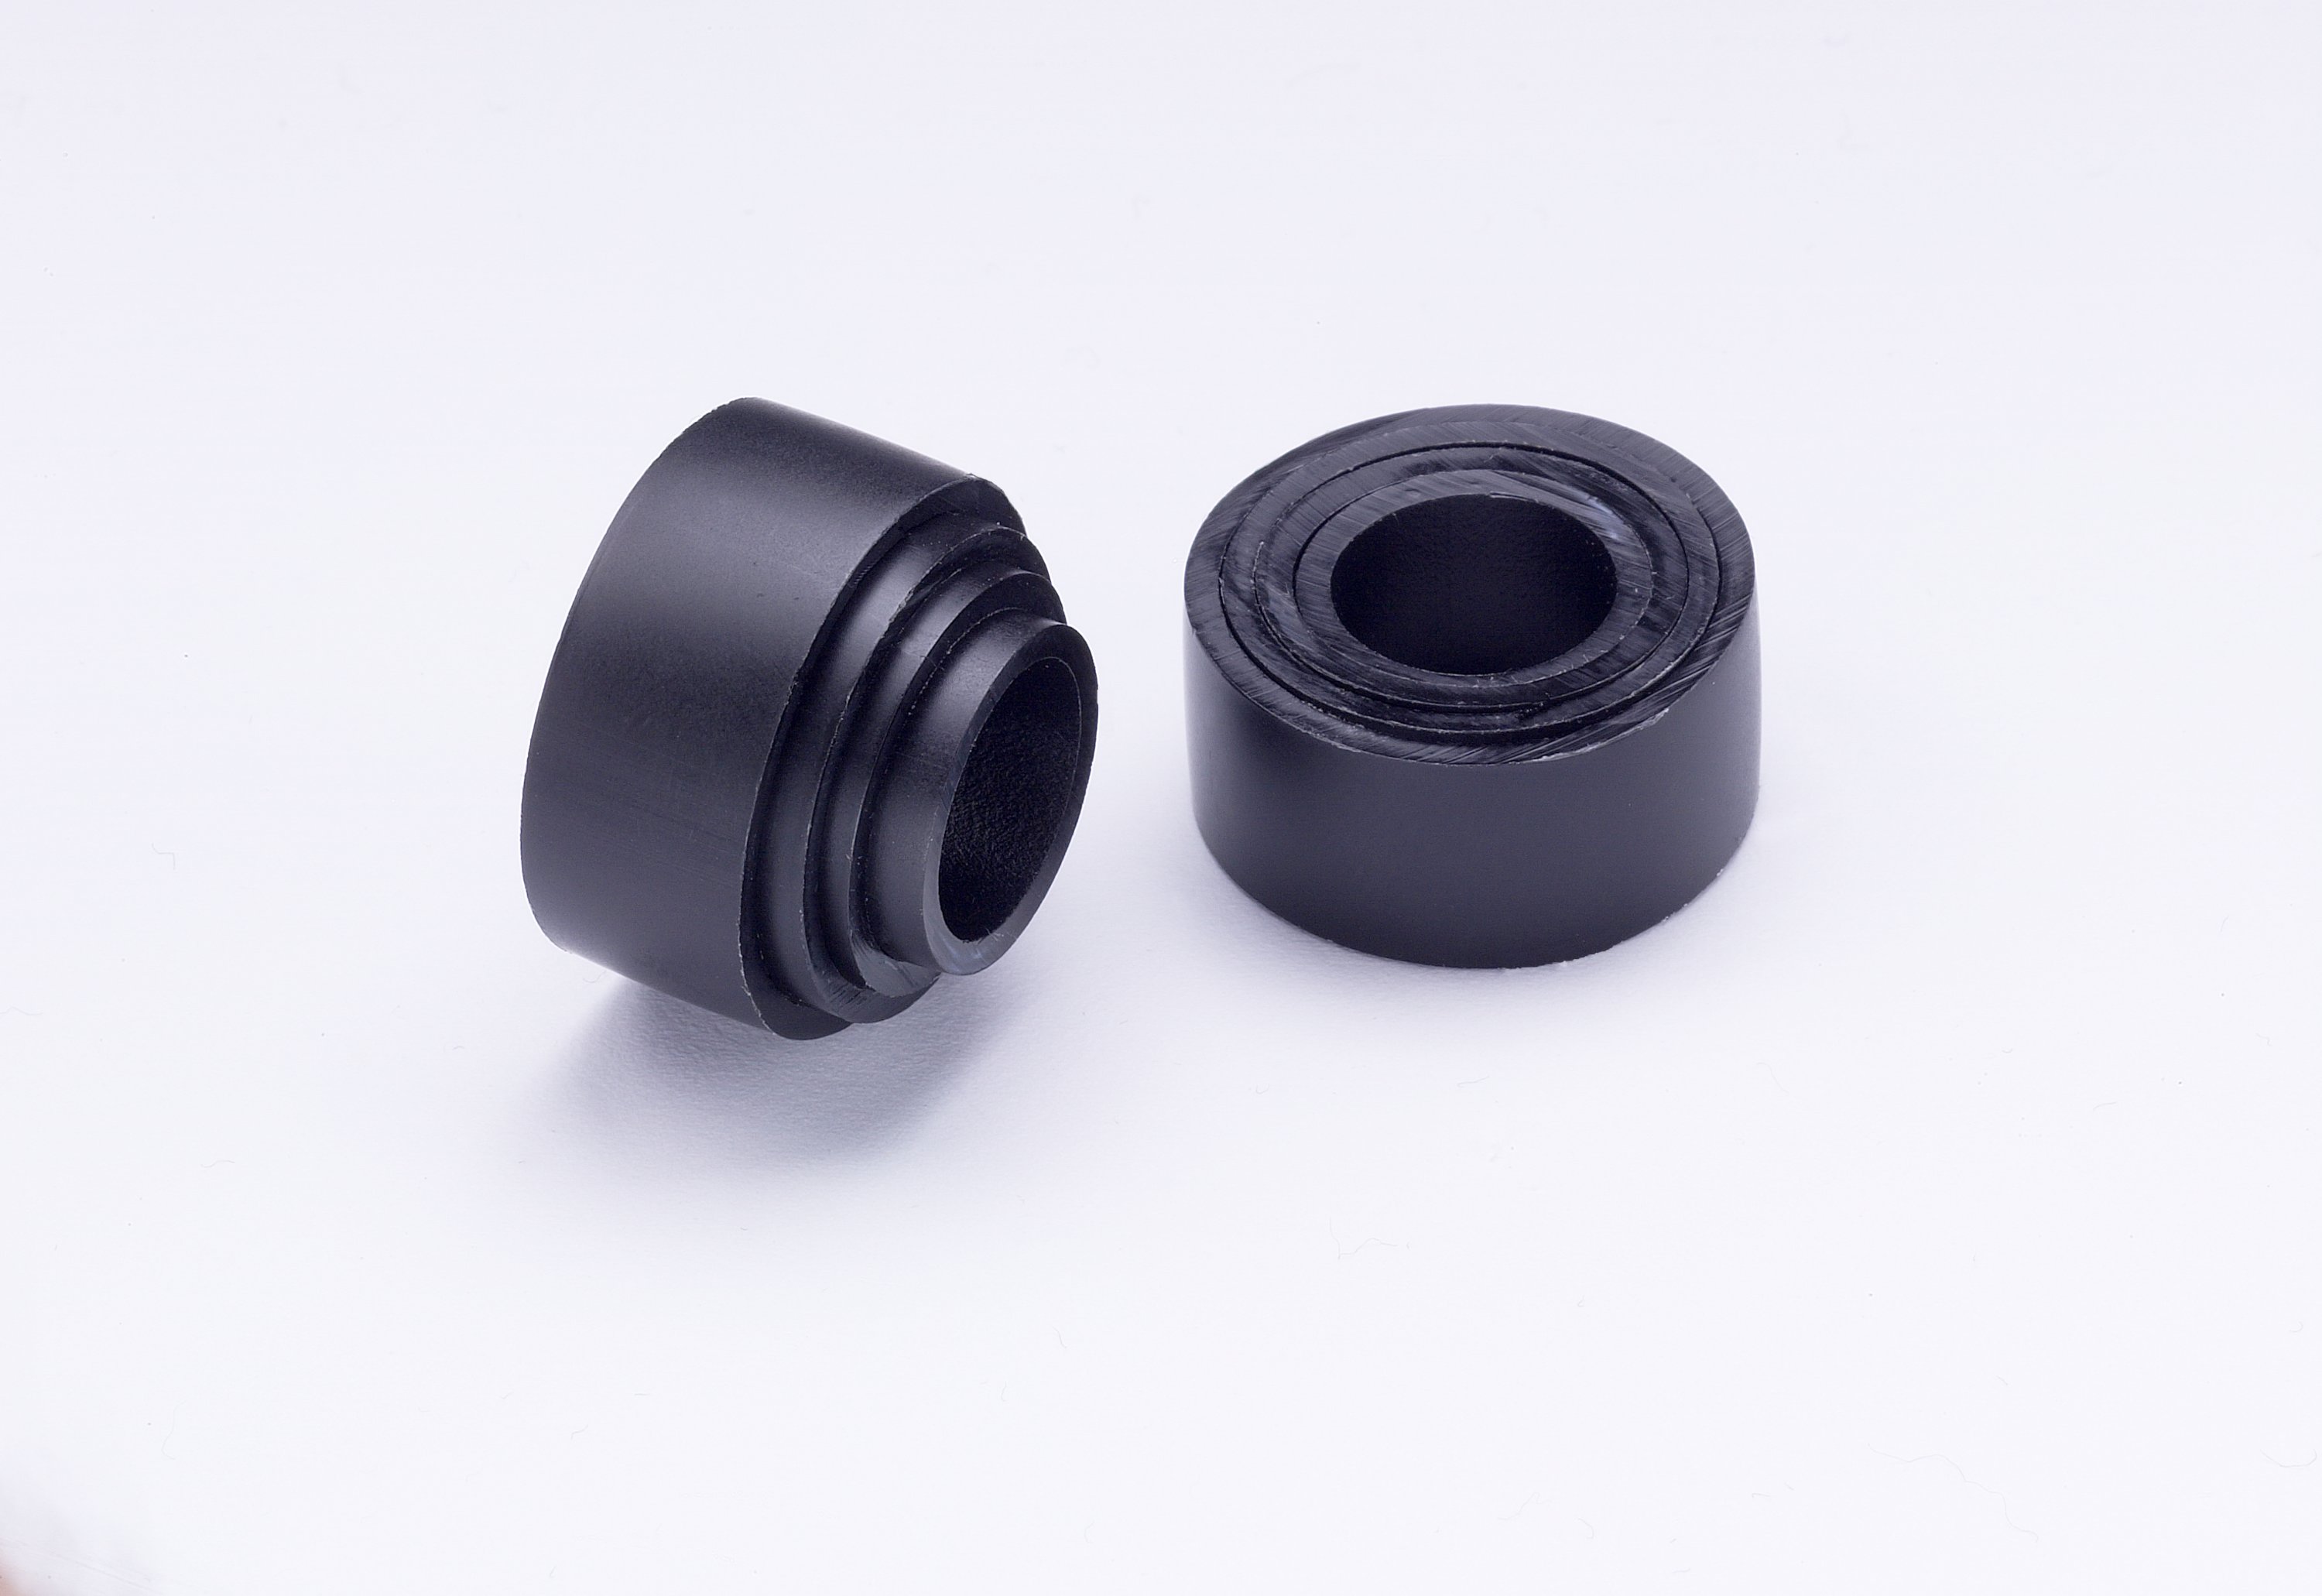 Using the 3M™ Flange Adapter is simple, and provides the ability to adapt wheels of 1